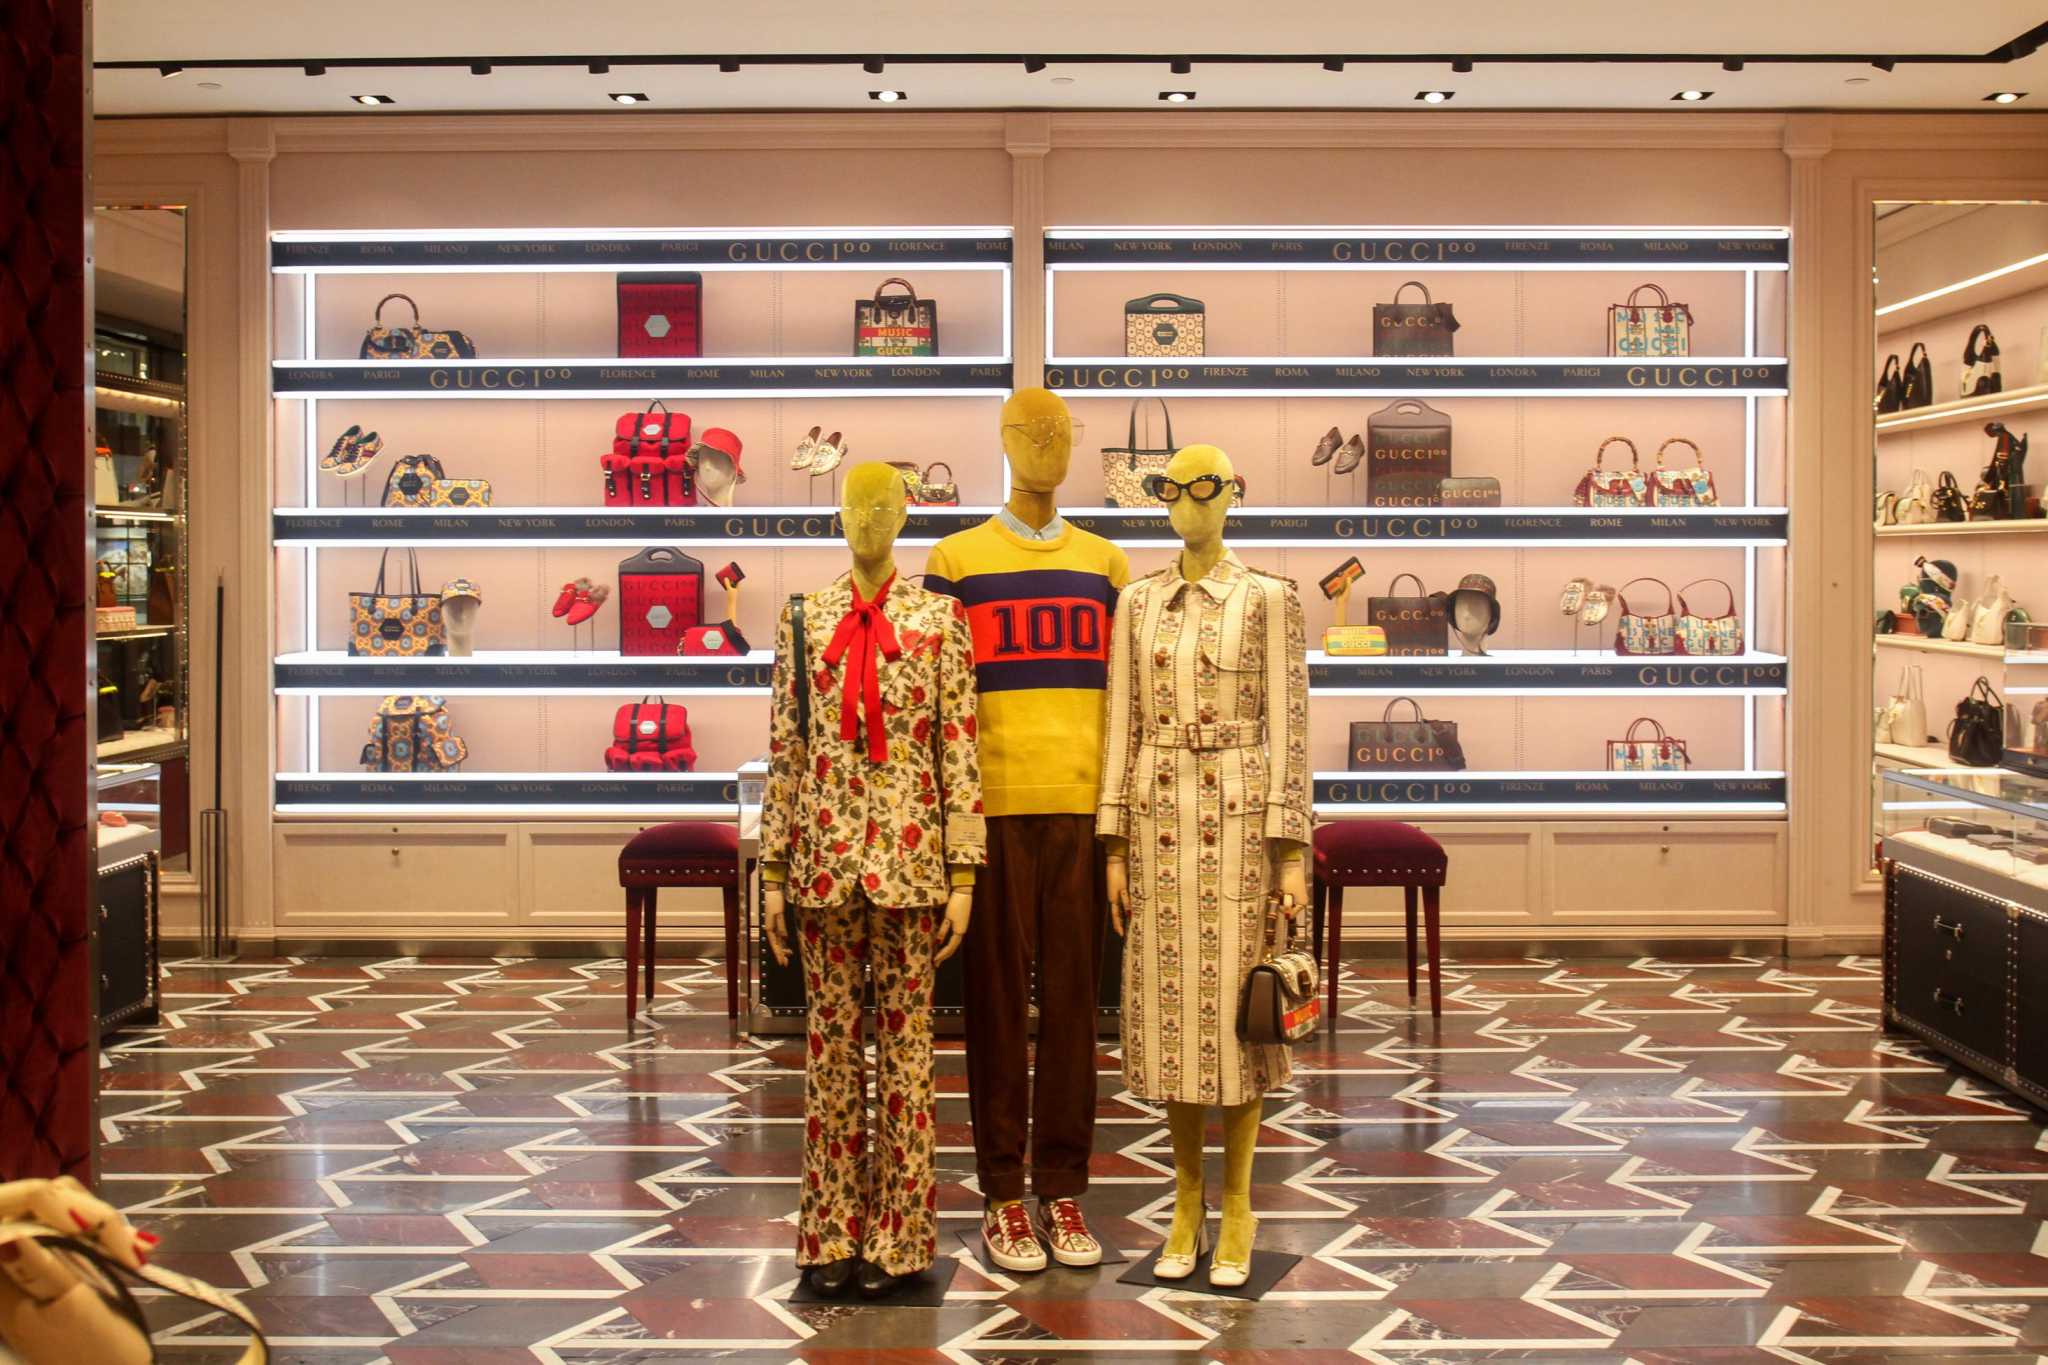 First look: Inside Gucci's exclusive product drop at Houston Galleria